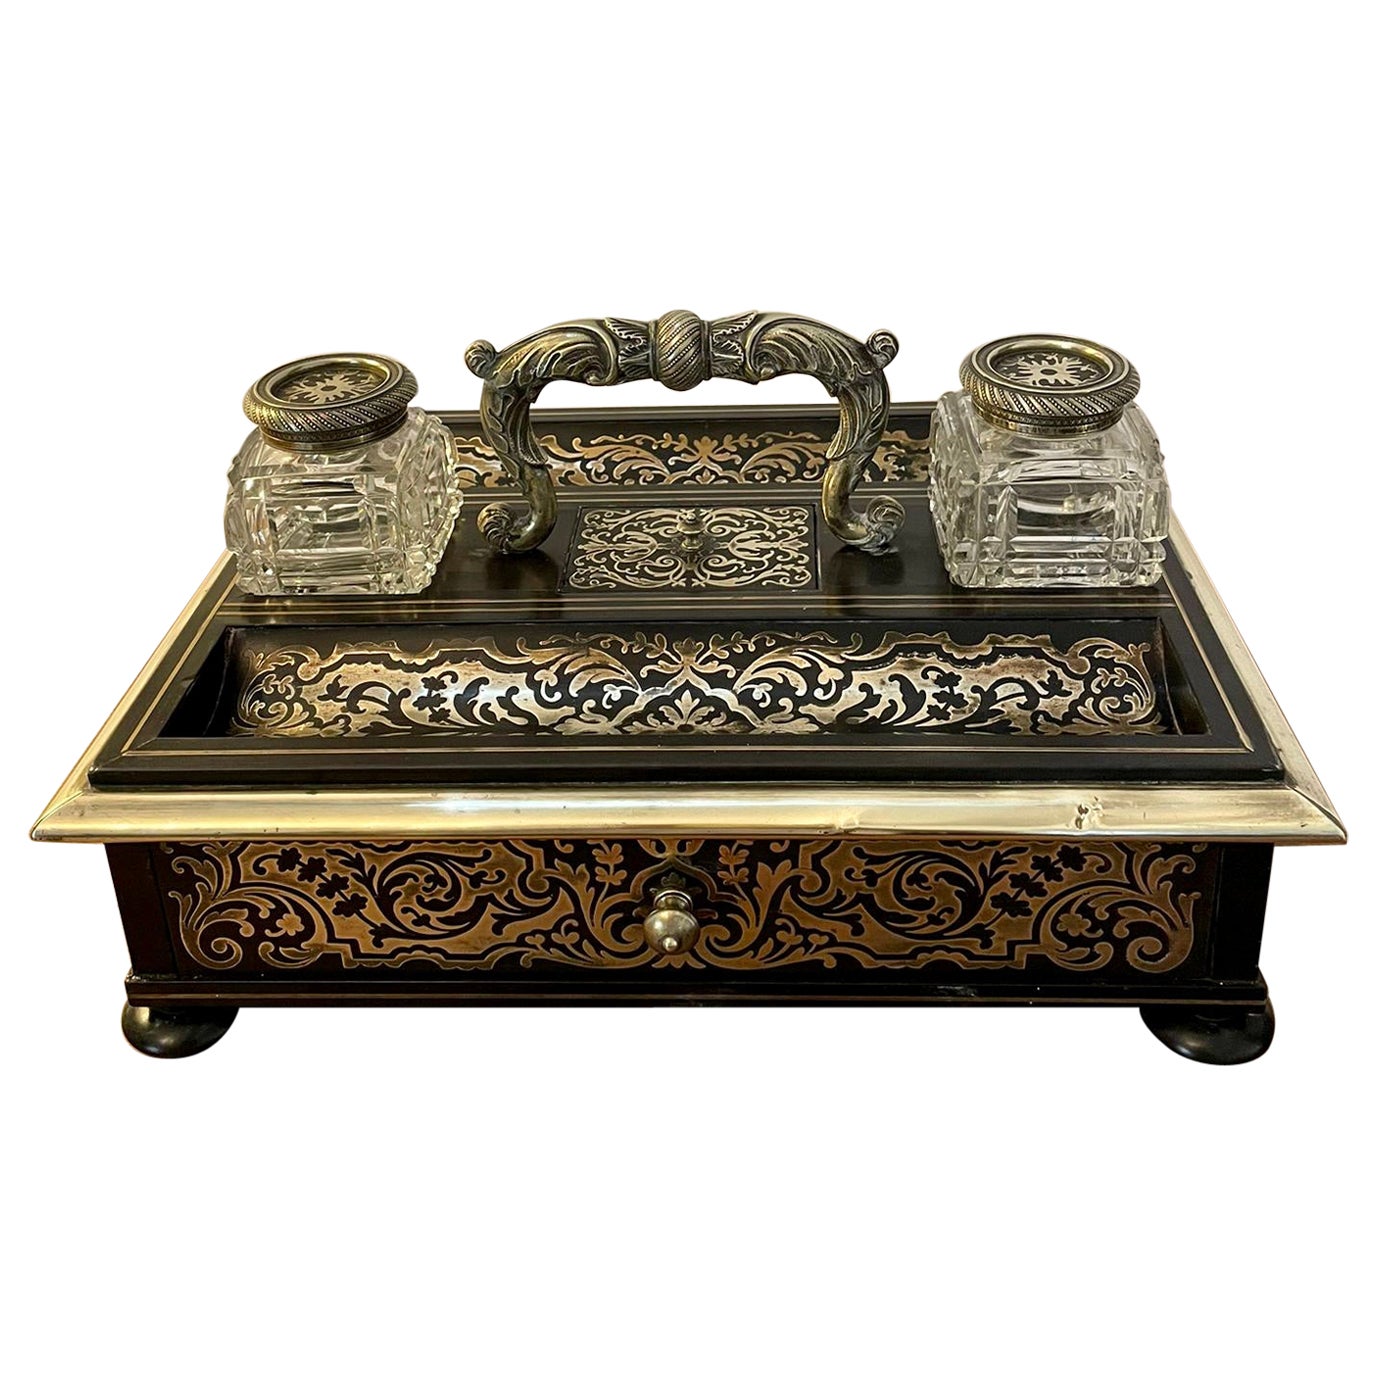 Fine Quality Antique Victorian French Freestanding Inlaid Boulle Desk Set